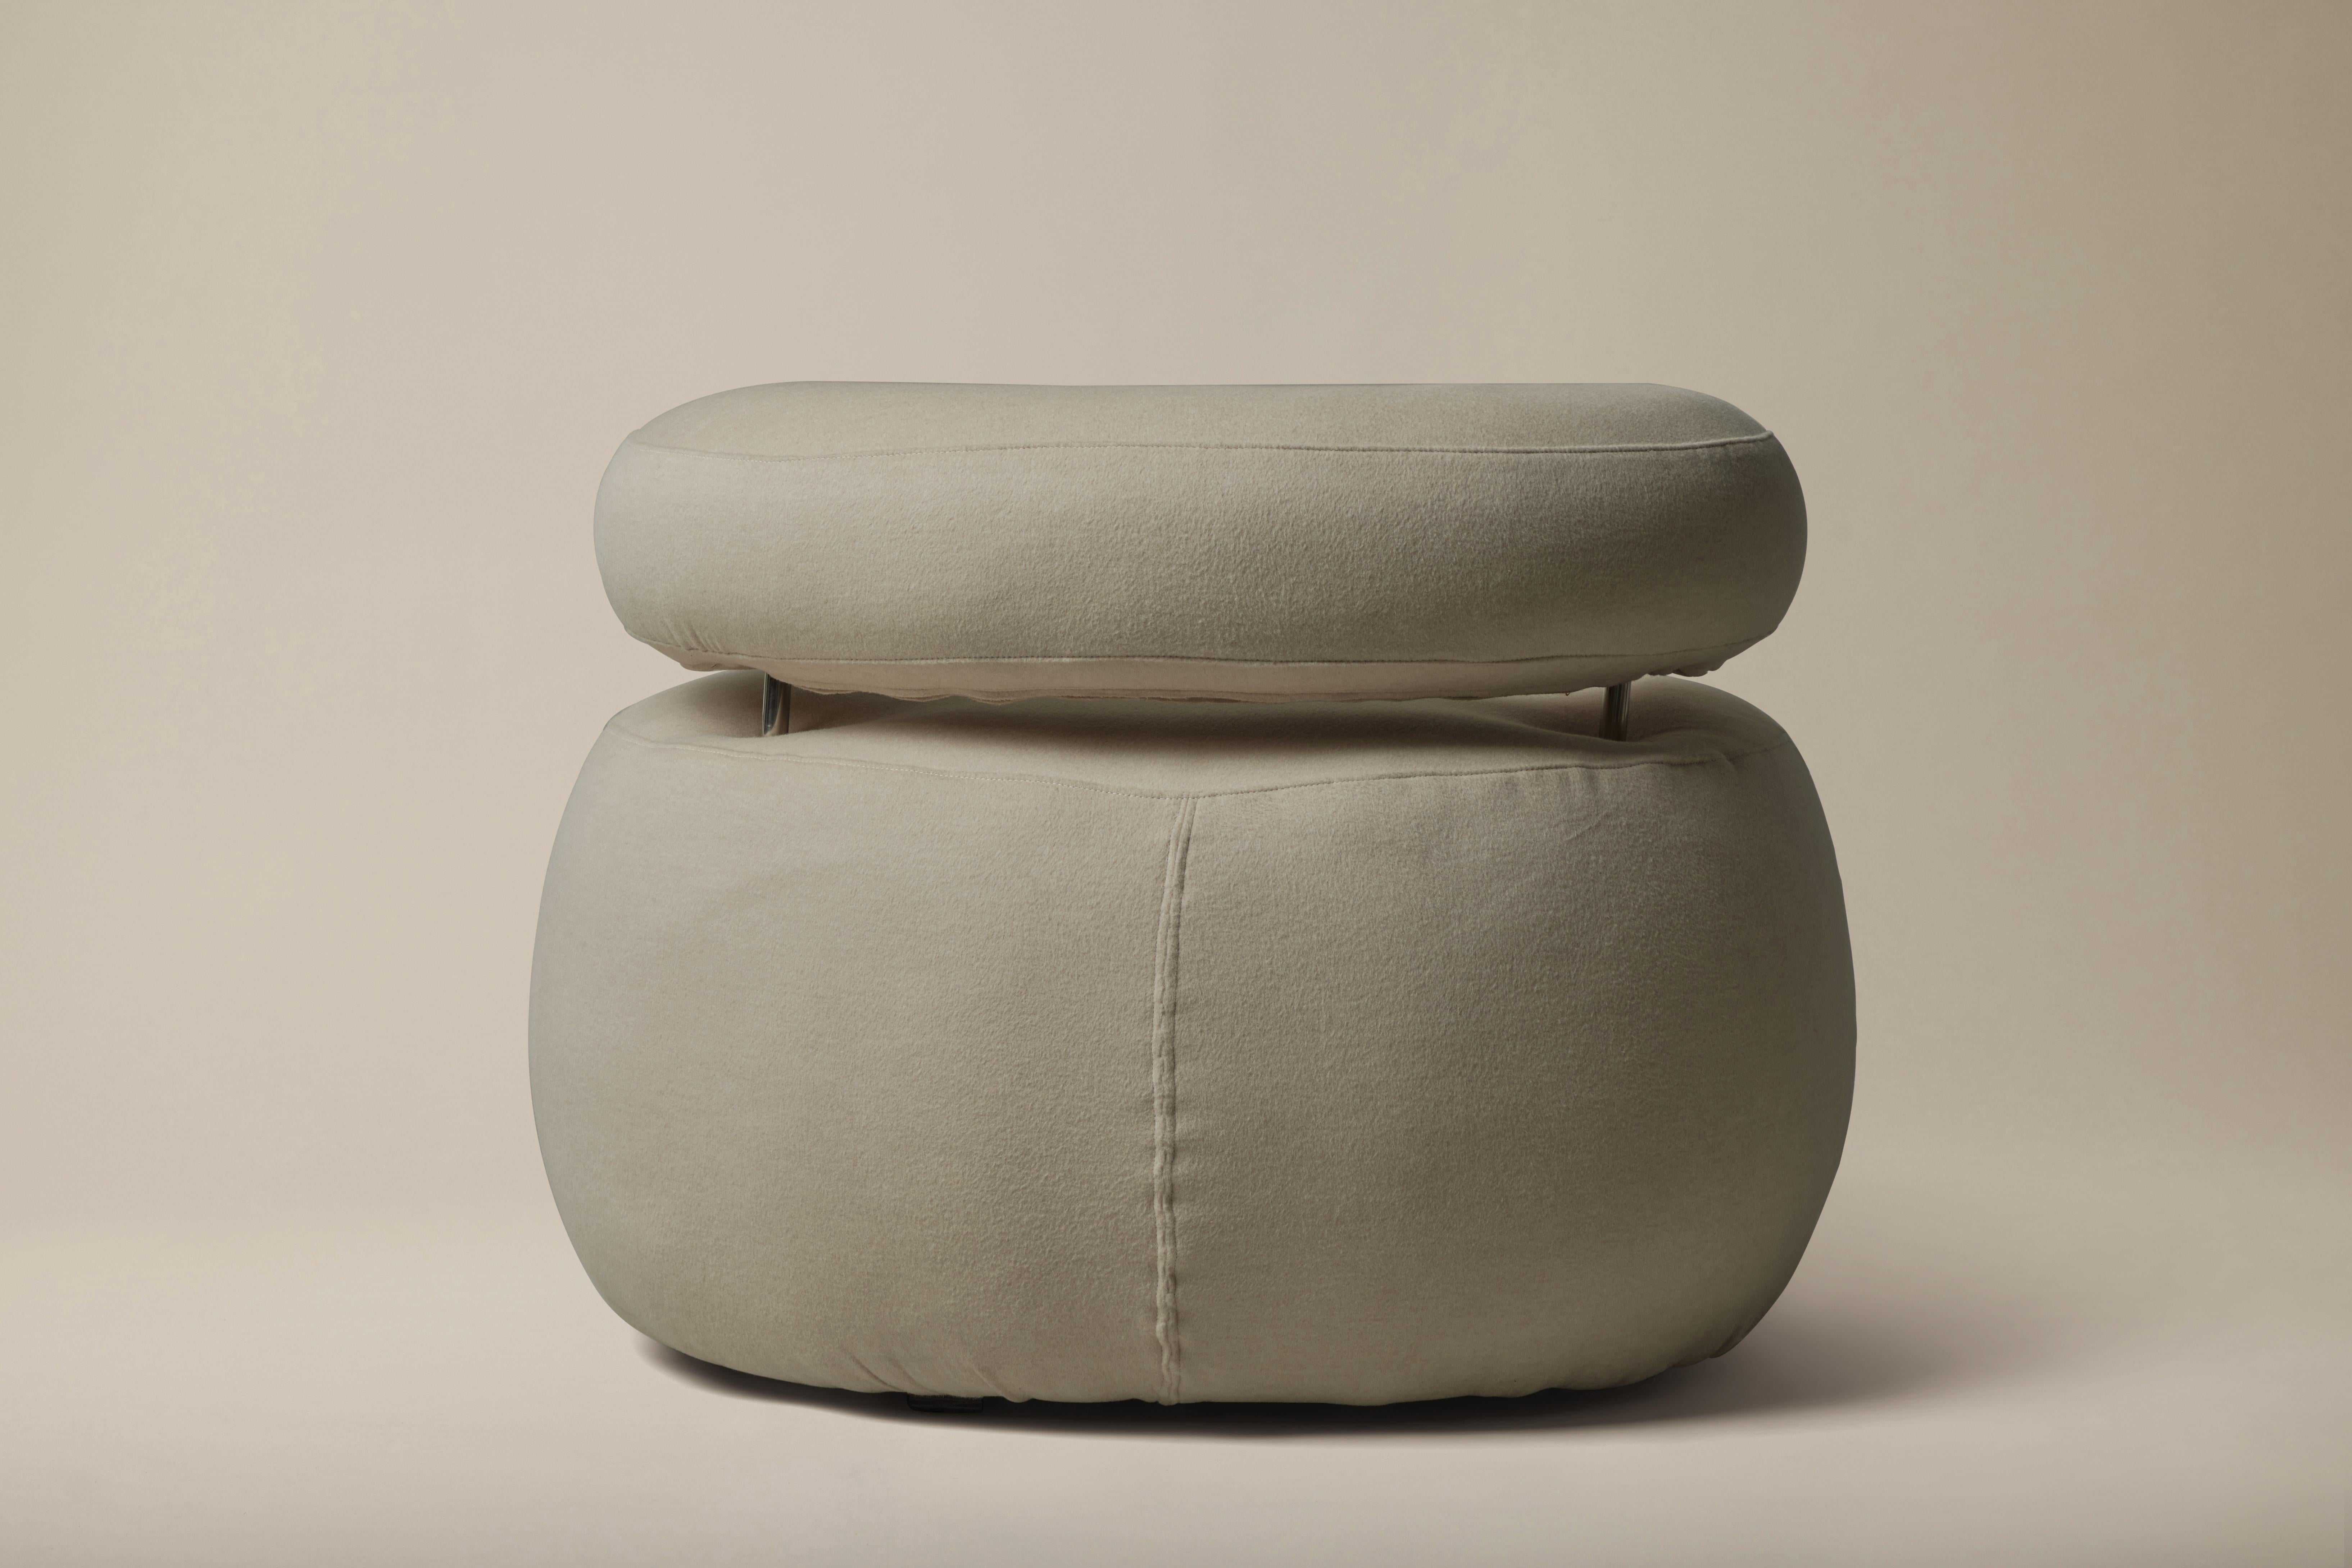 Wool Atrio Vintage Roche Bobois Style Pouf Lounge Chair in Cashmere, 1970s For Sale